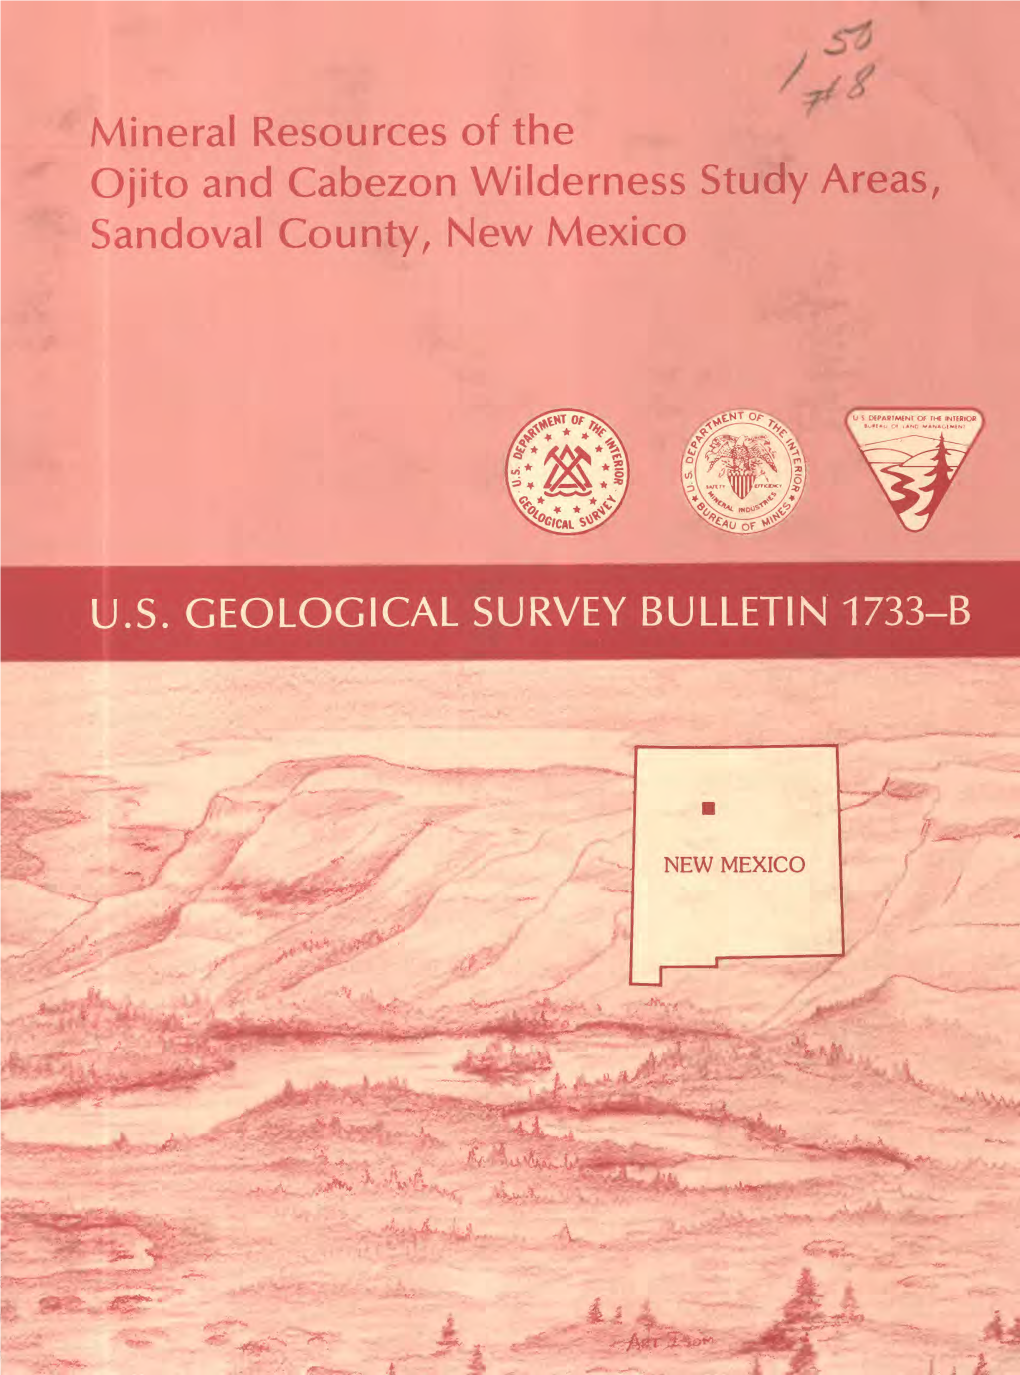 Mineral Resources of the Ojito and Cabezon Wilderness Study Areas, Sandoval County, New Mexico